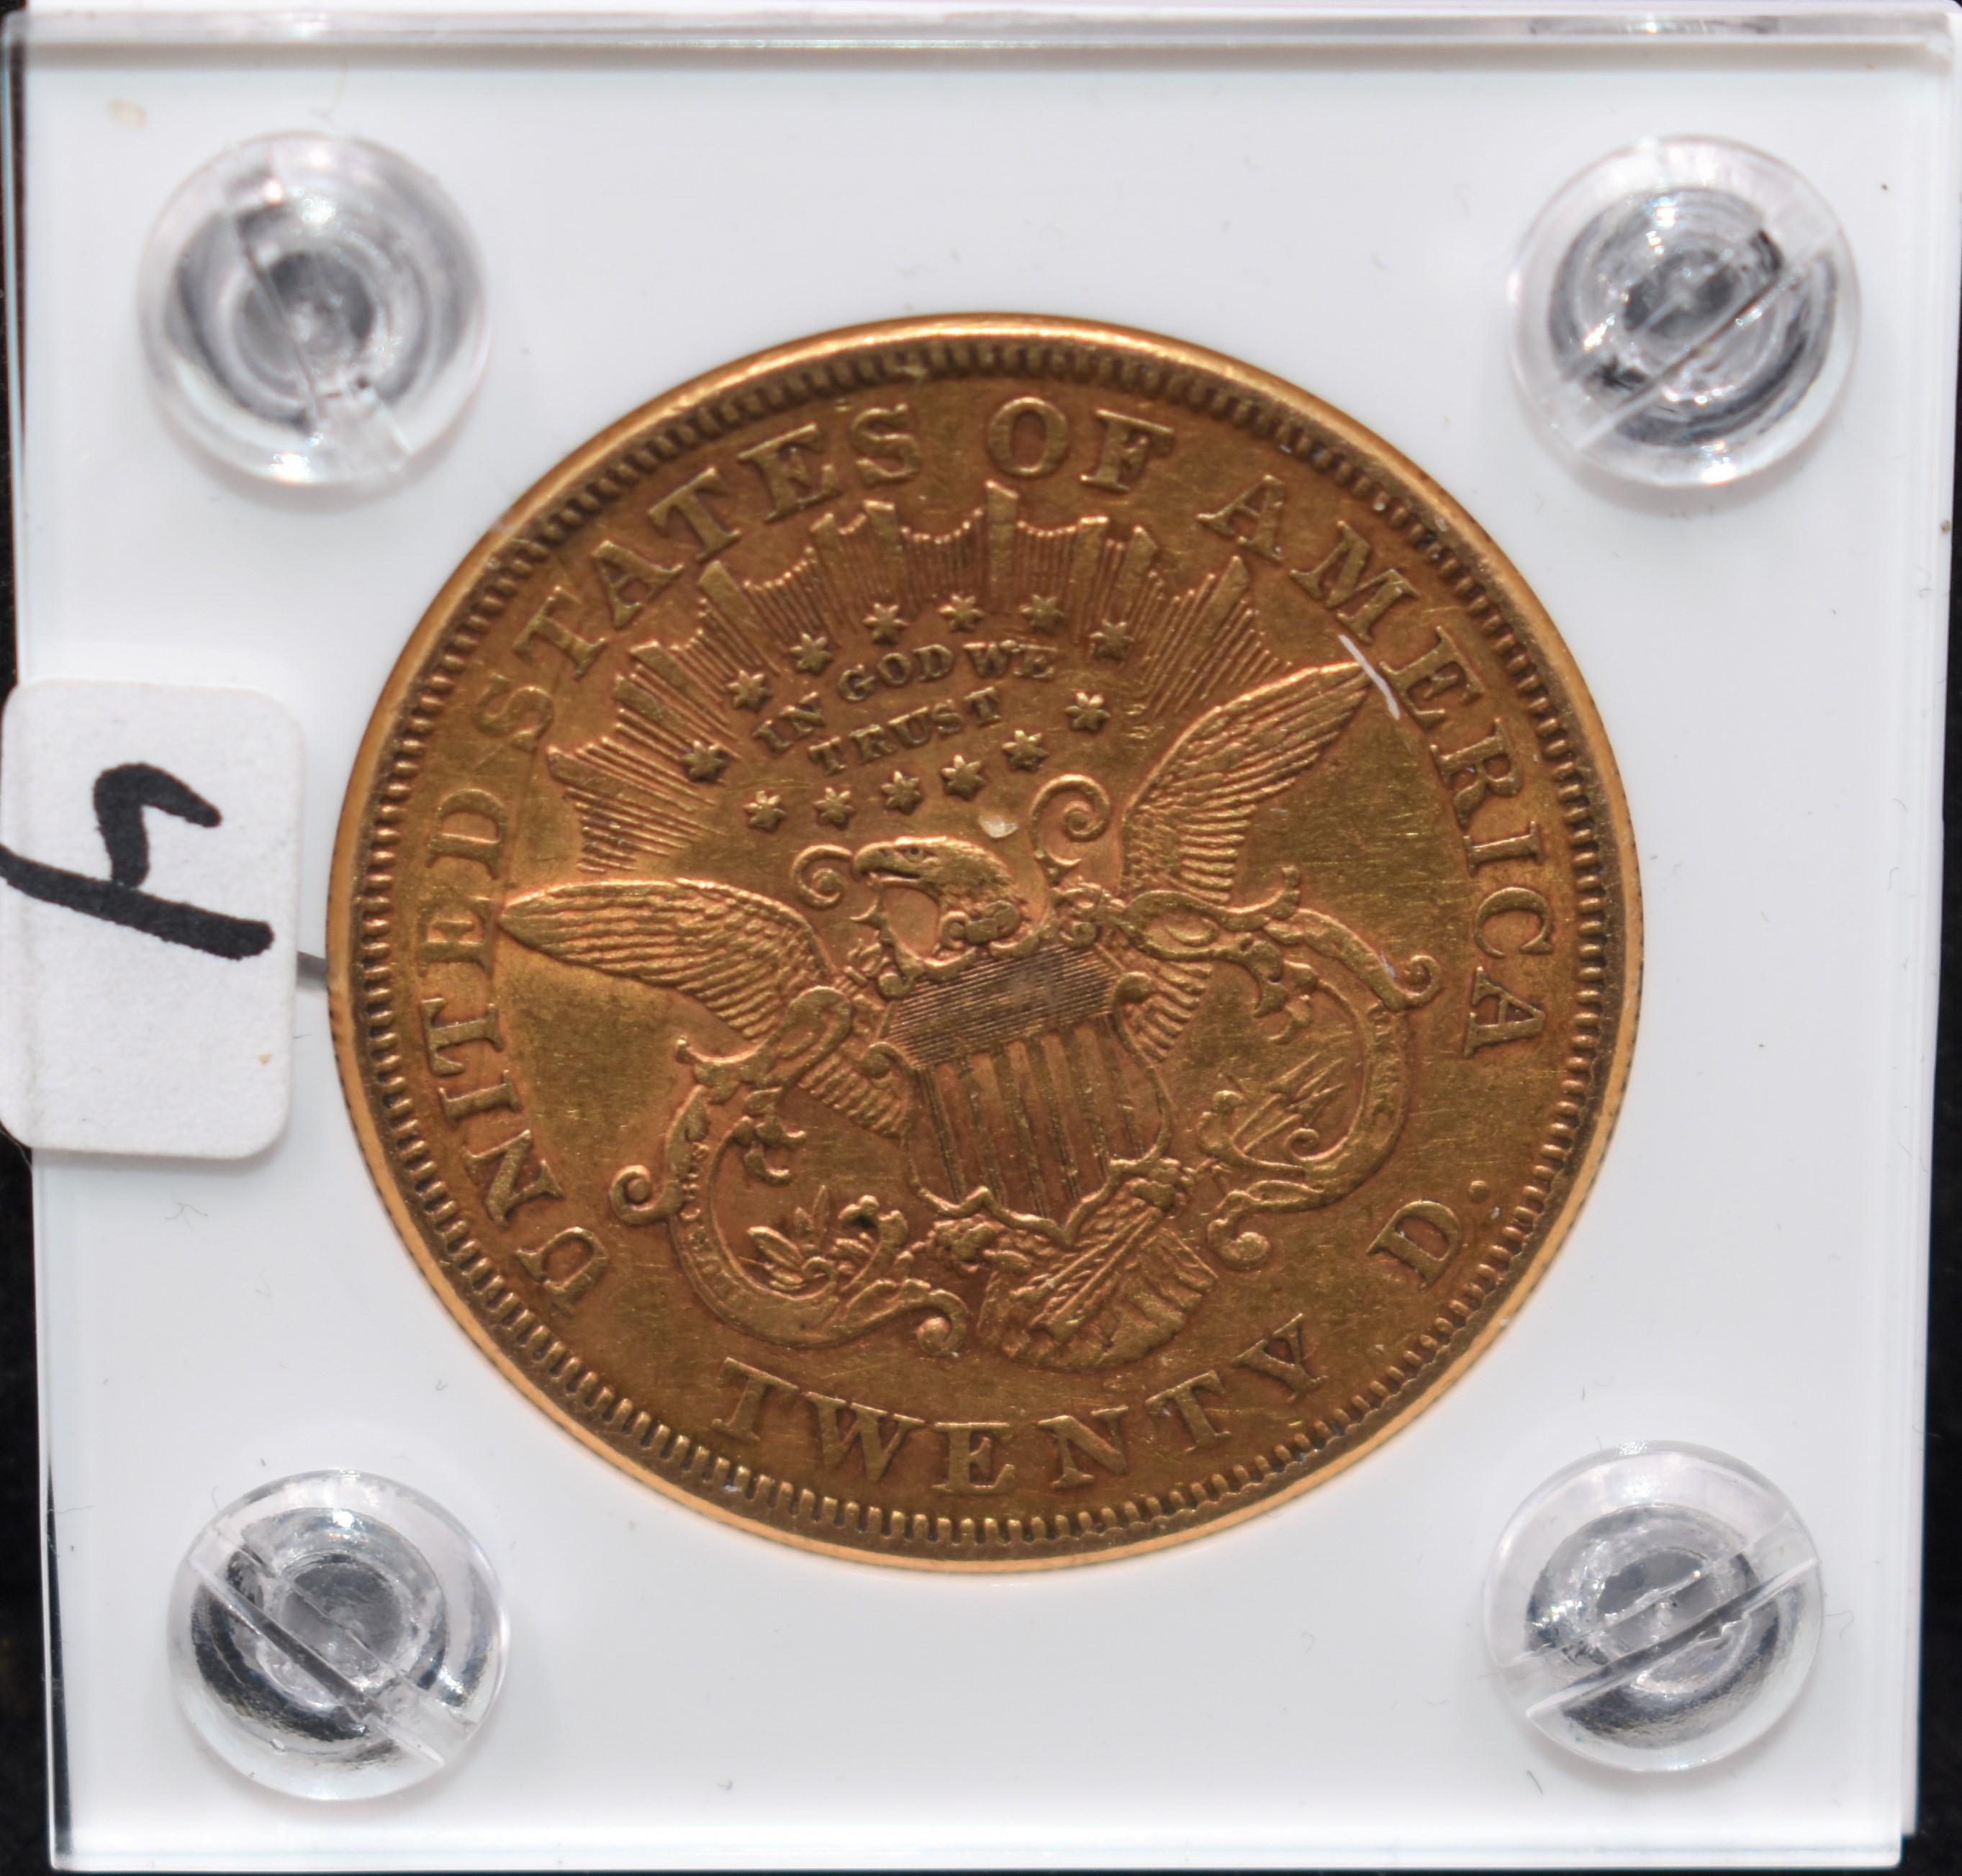 1874 $20 LIBERTY GOLD COIN FROM SAFE'S